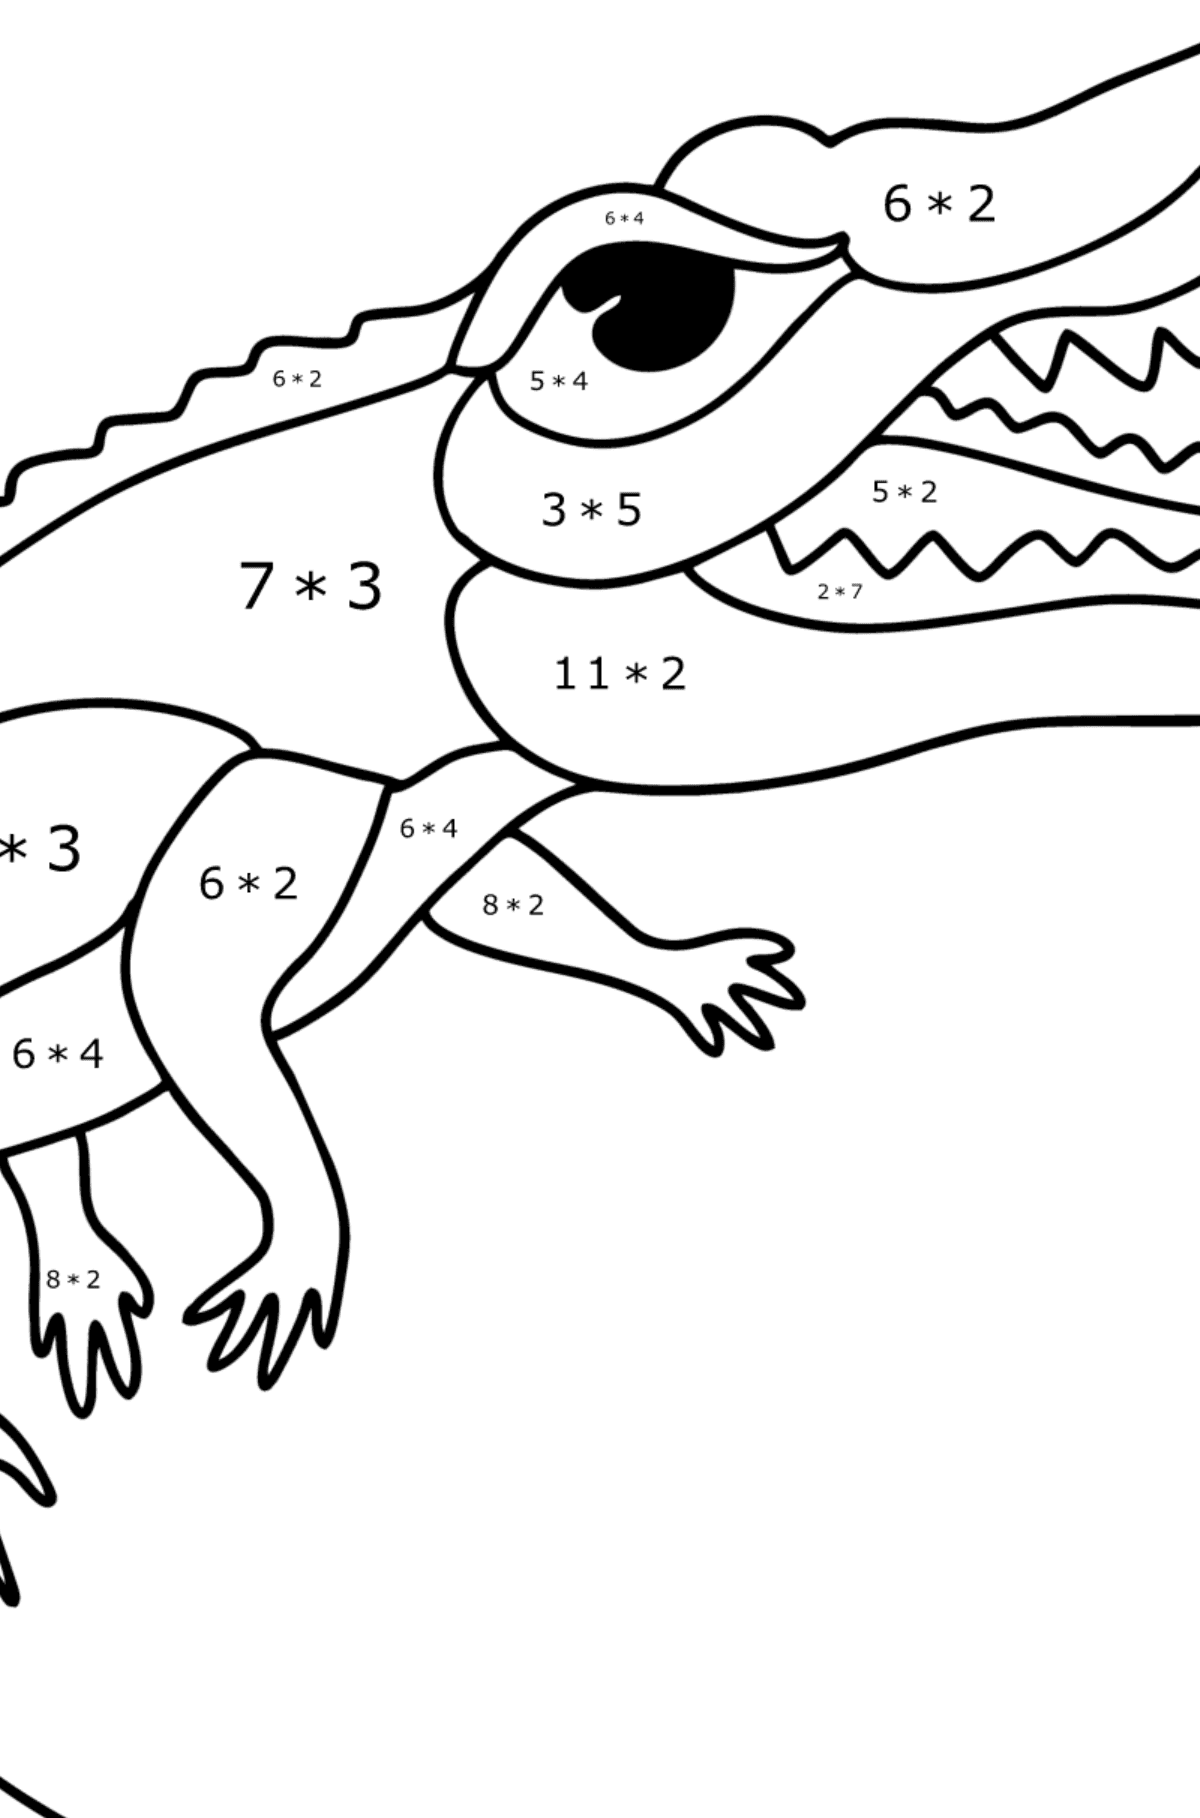 Saltwater Crocodile сoloring page - Math Coloring - Multiplication for Kids